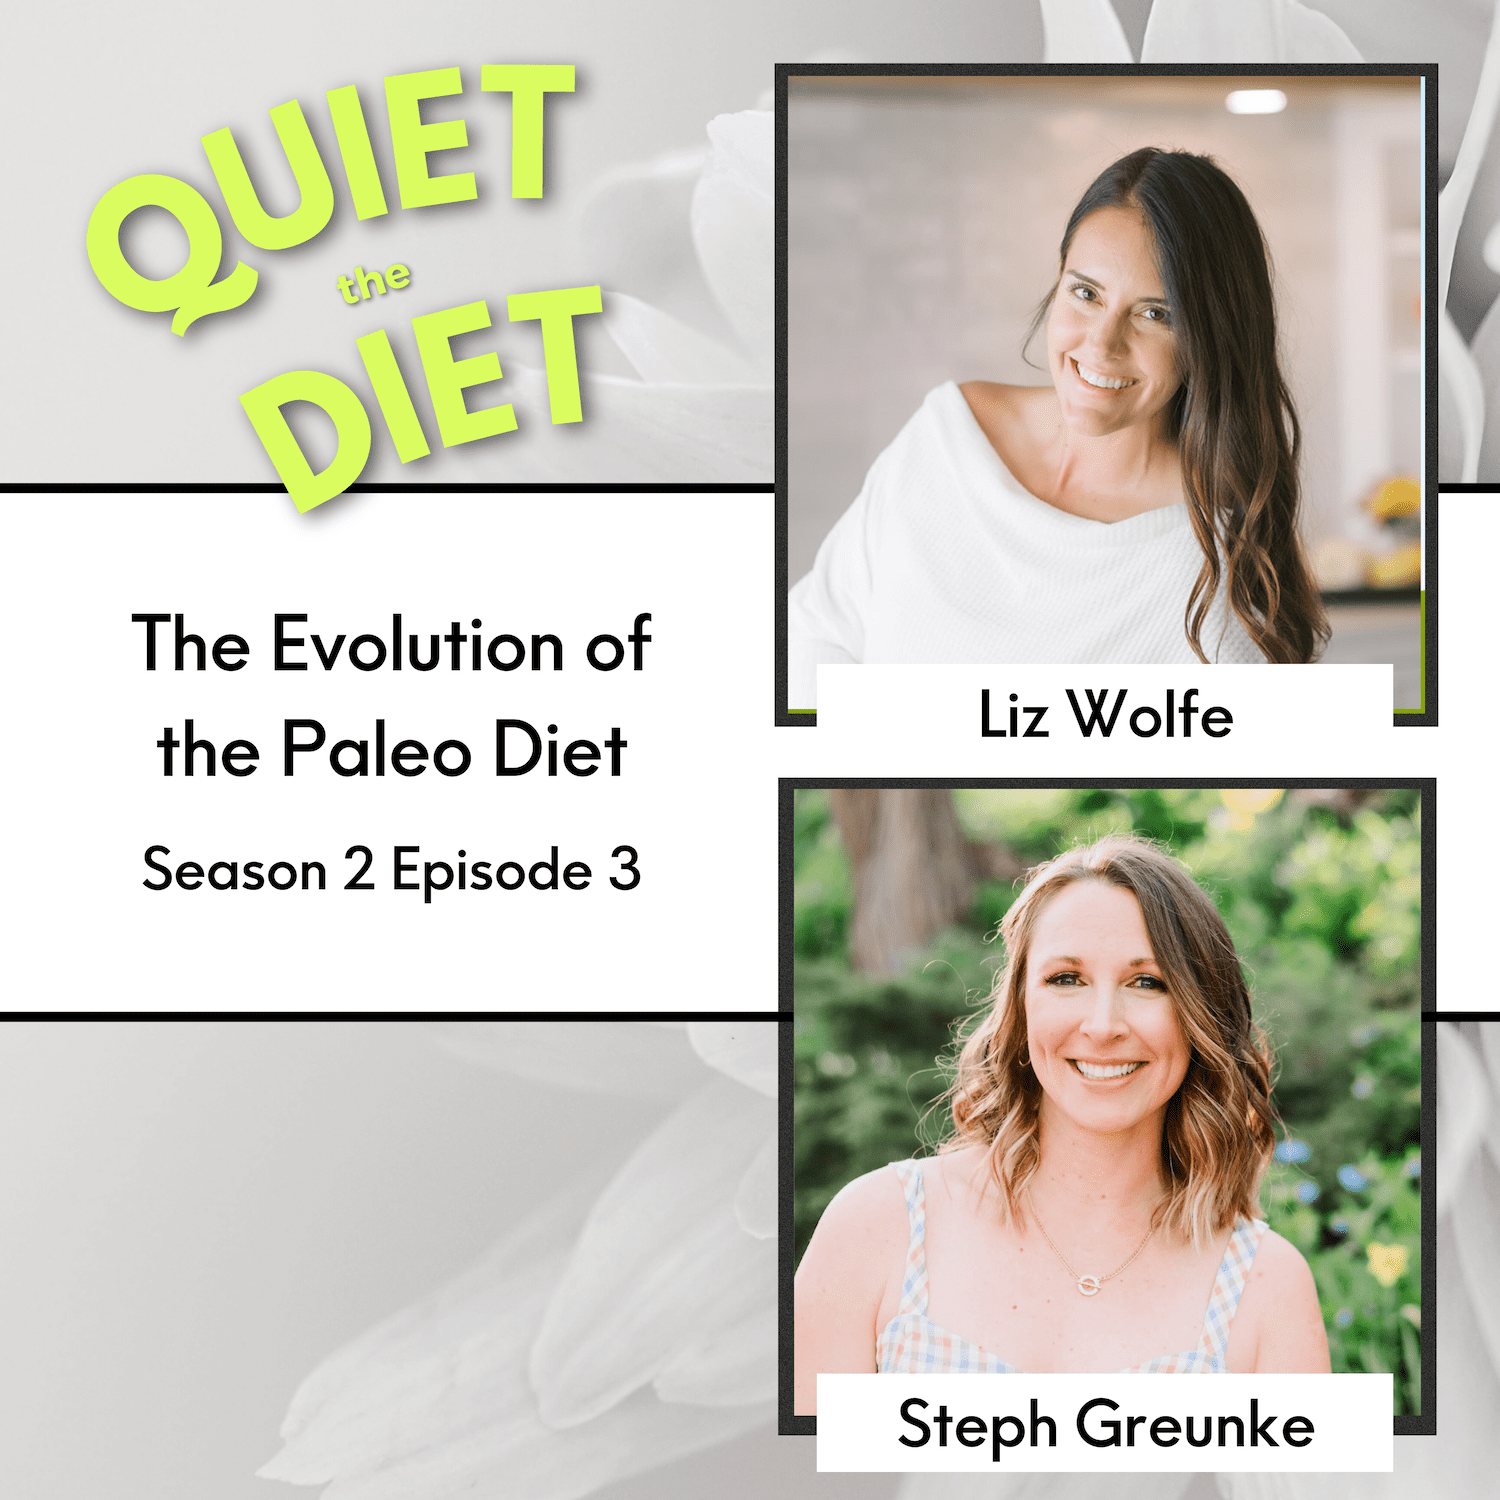 The Evolution of the Paleo Diet on Quiet the Diet with Michelle Shapiro RD